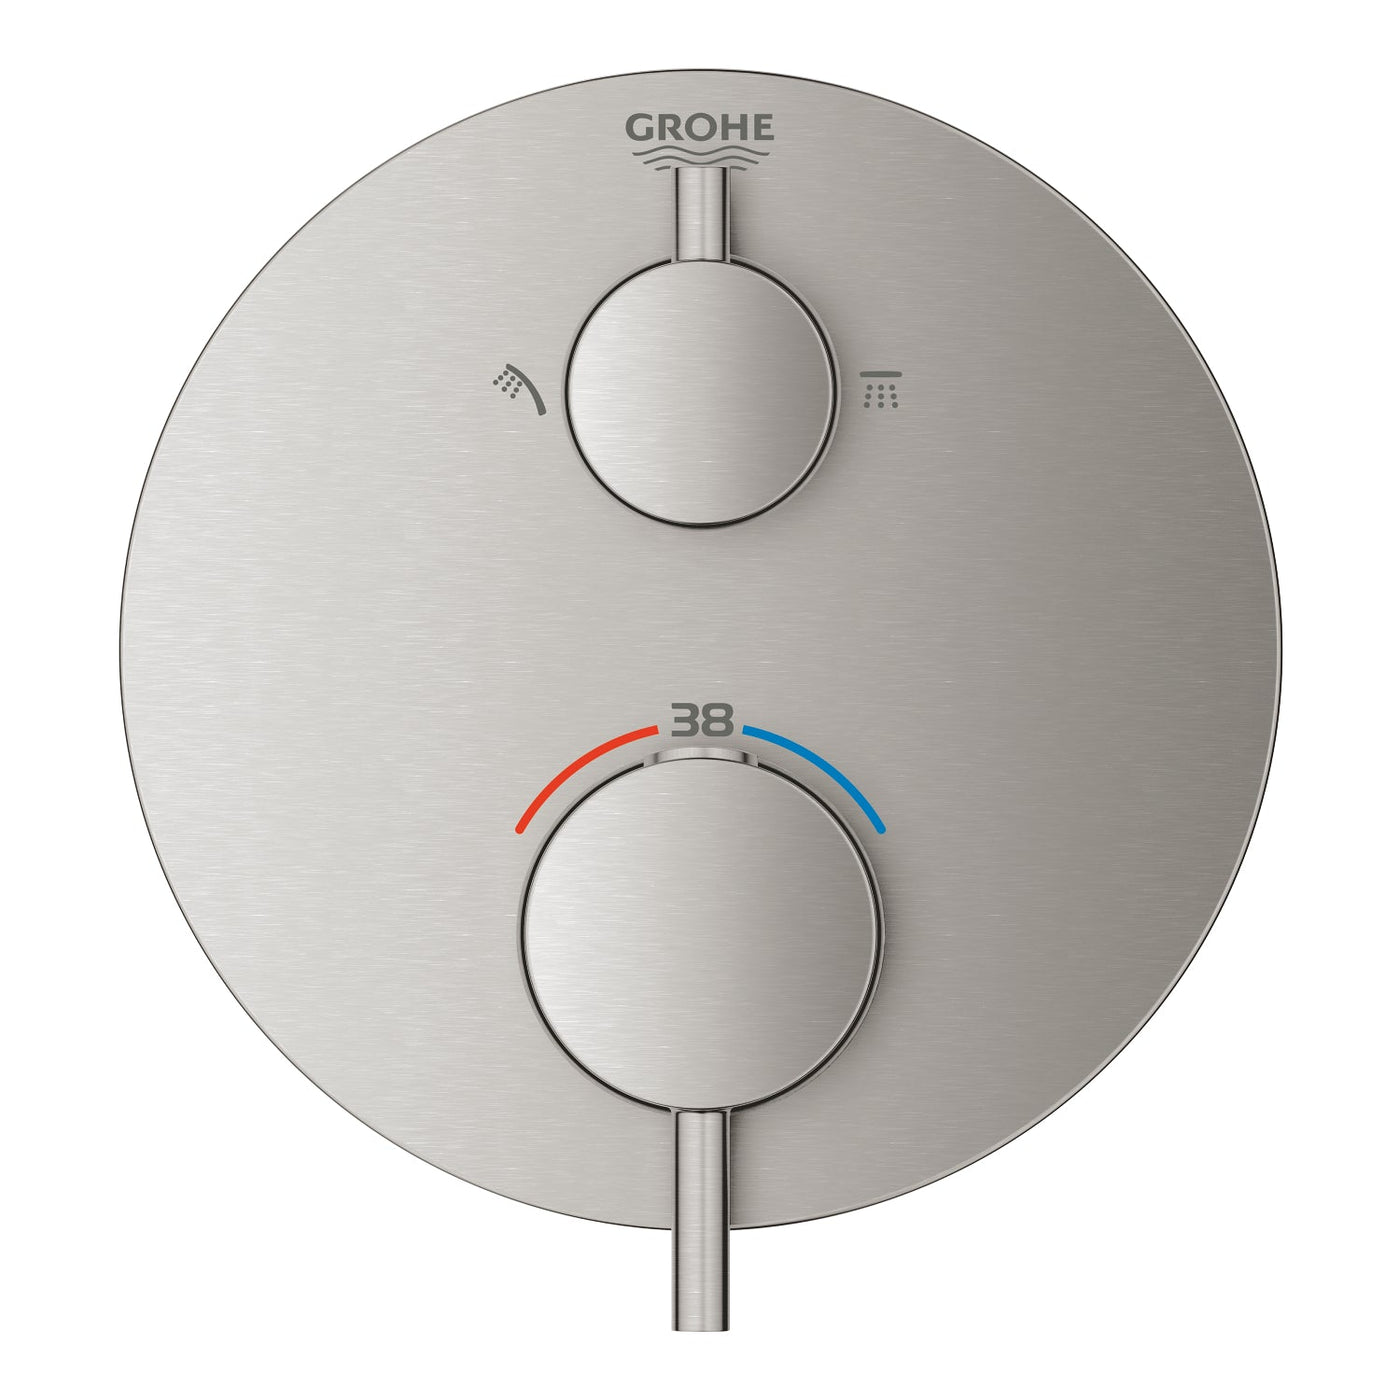 Grohe Supersteel Atrio Thermostatic shower mixer for 2 outlets with integrated shut off/diverter valve - Letta London - Twin Valves With Diverter